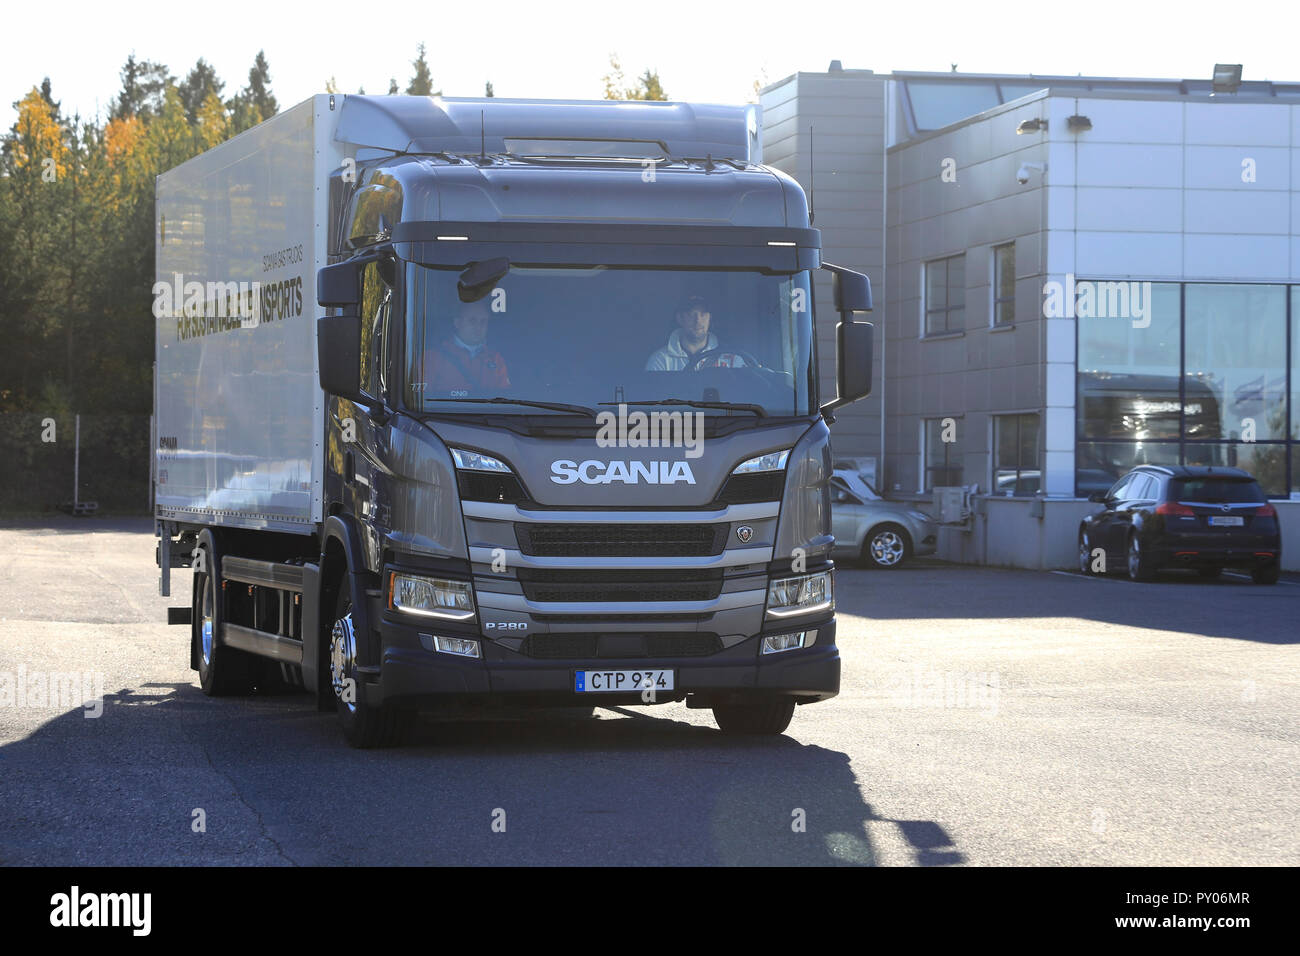 Lieto, Finland - October 19, 2018: Scania CNG/CGB gas powered P280 delivery truck test driven on Scania Urban Tour 2018 Turku. Stock Photo